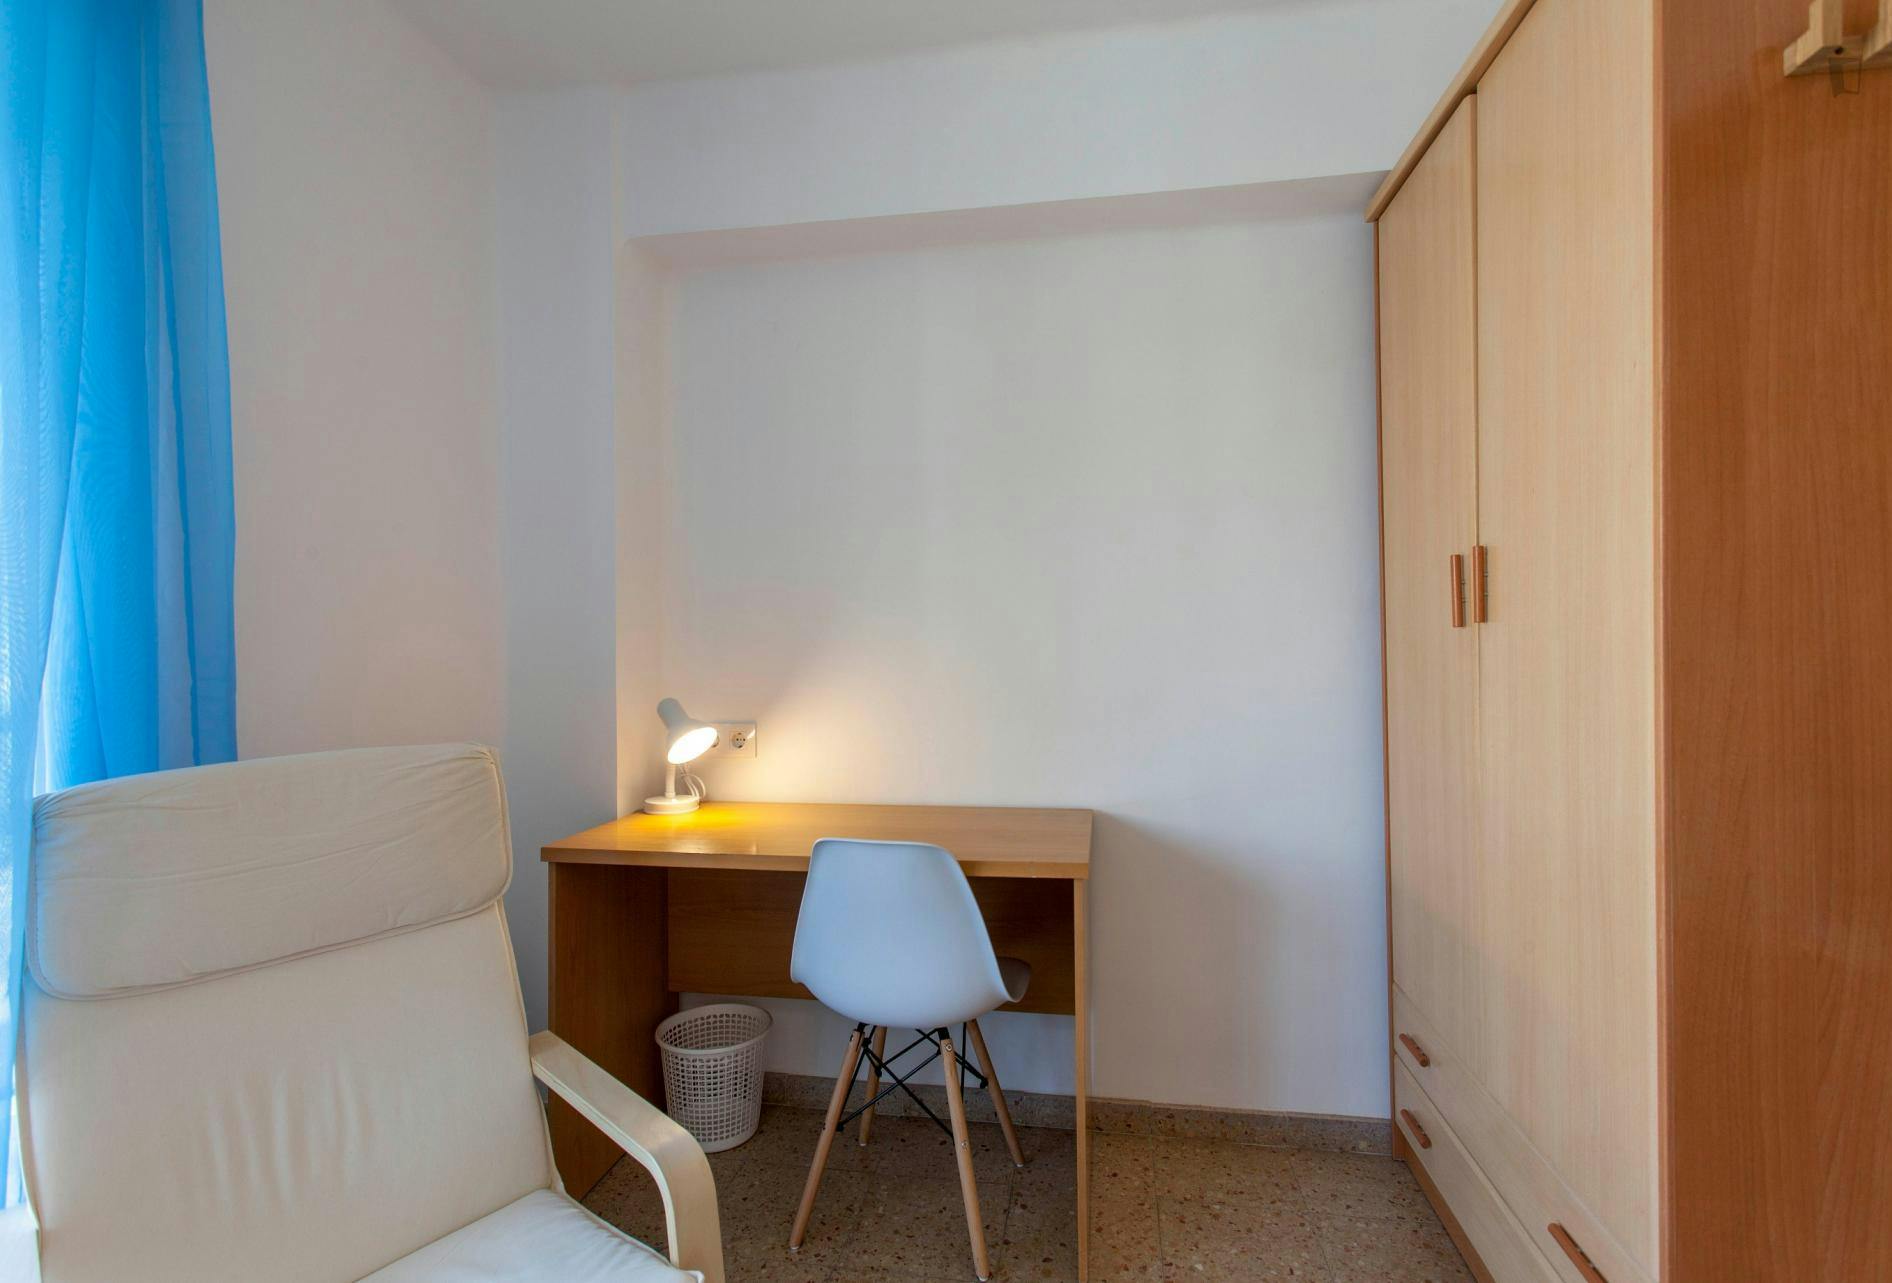 Fantastic double bedroom with a balcony close to Instituto INTER